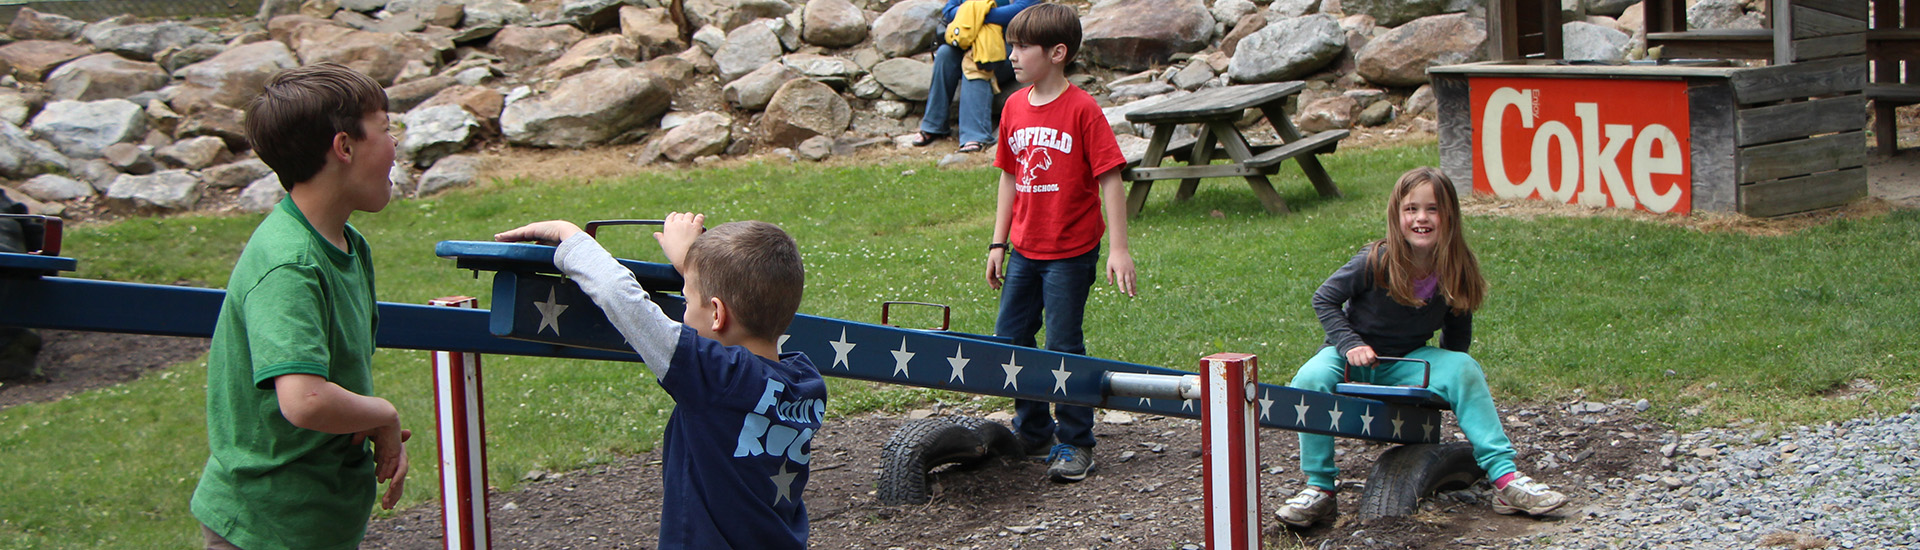 Kids playing on a teeter-totter.